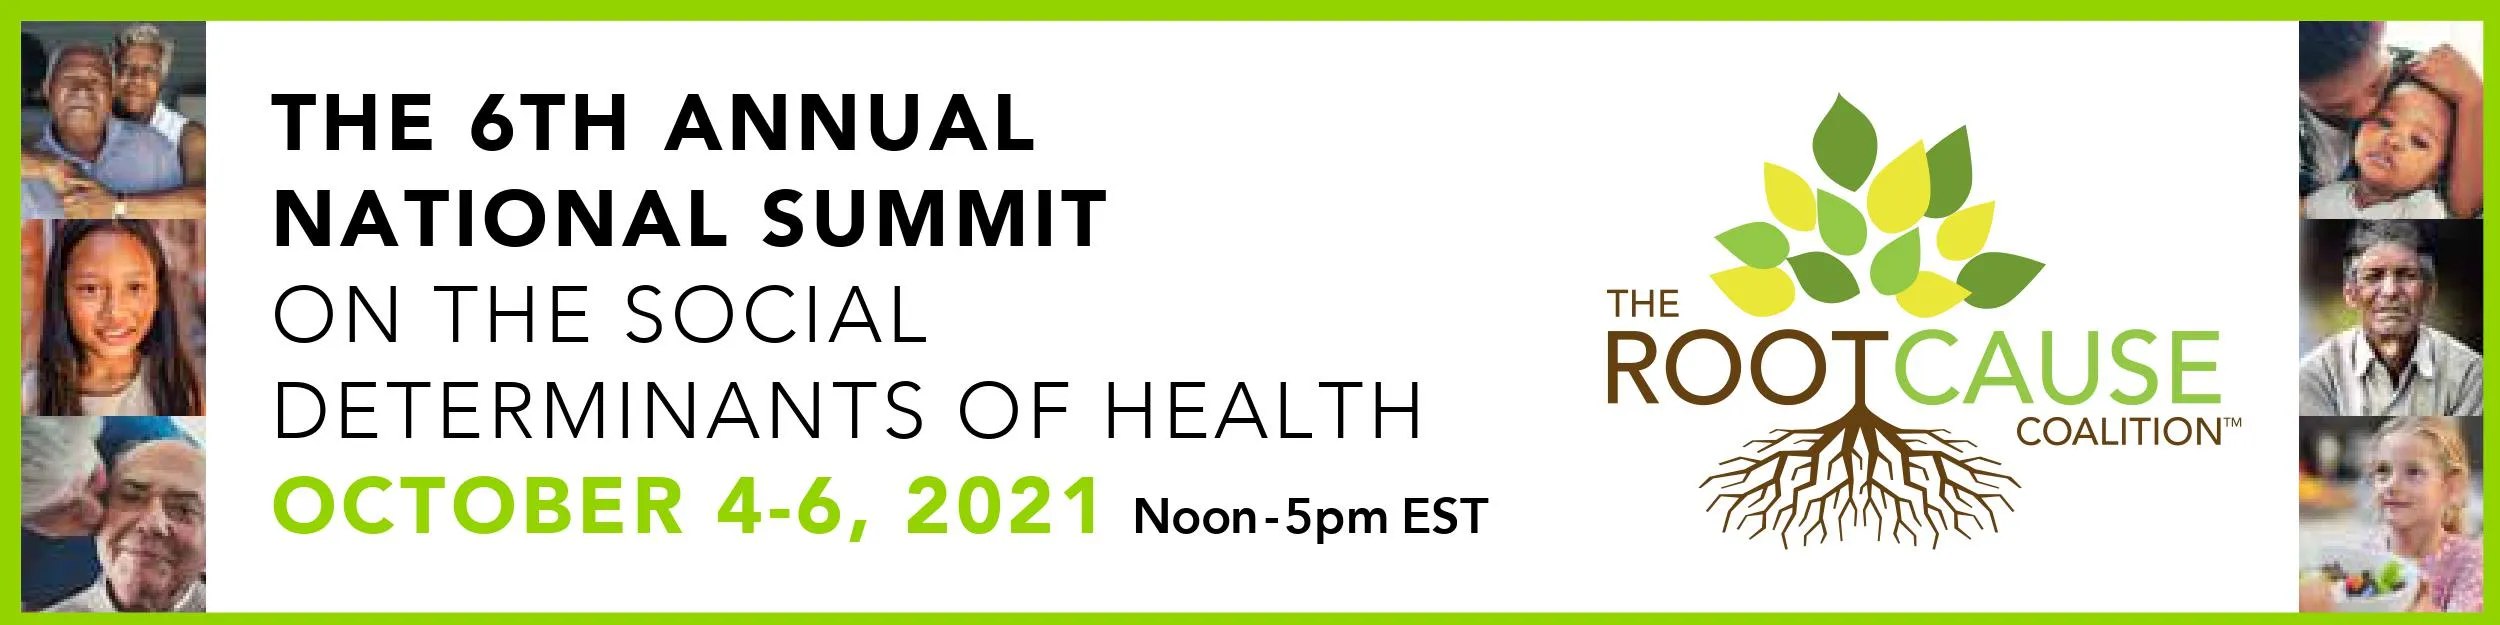 6th National Summit on the Social Determinants of Health